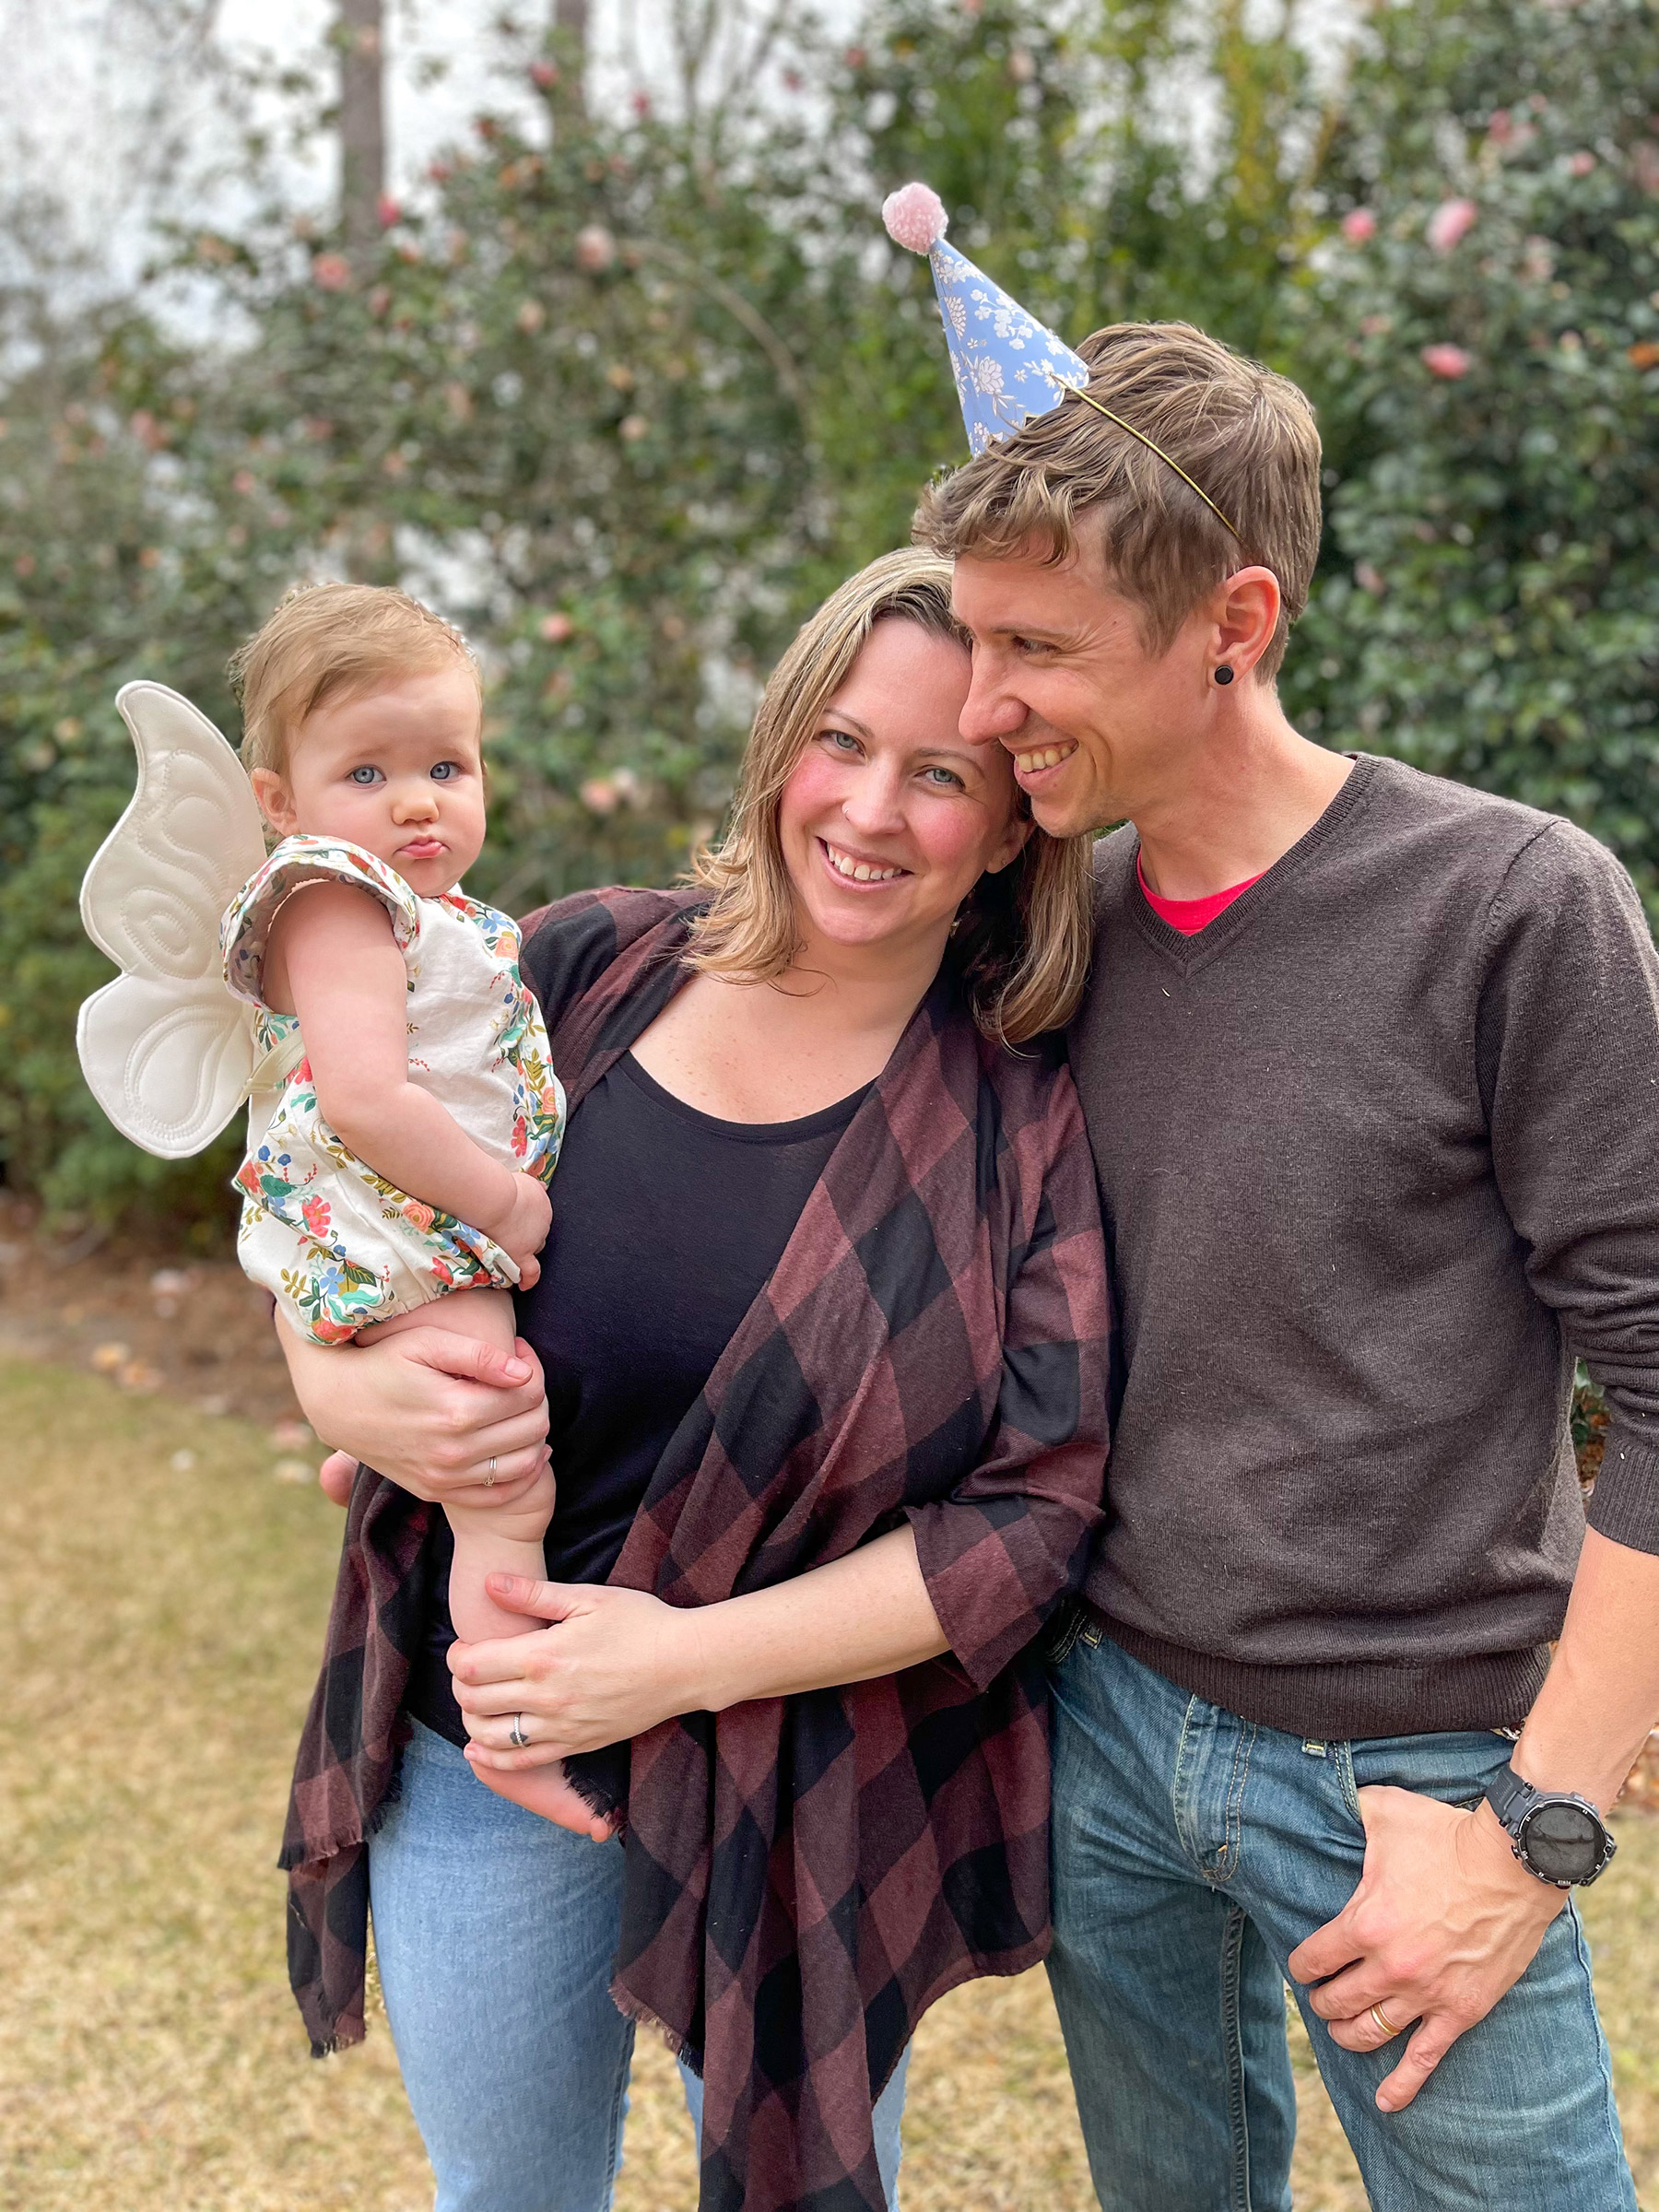 The author with her partner and daughter in Dothan, Ala., in February 2022. (Courtesy Karie Fugett)